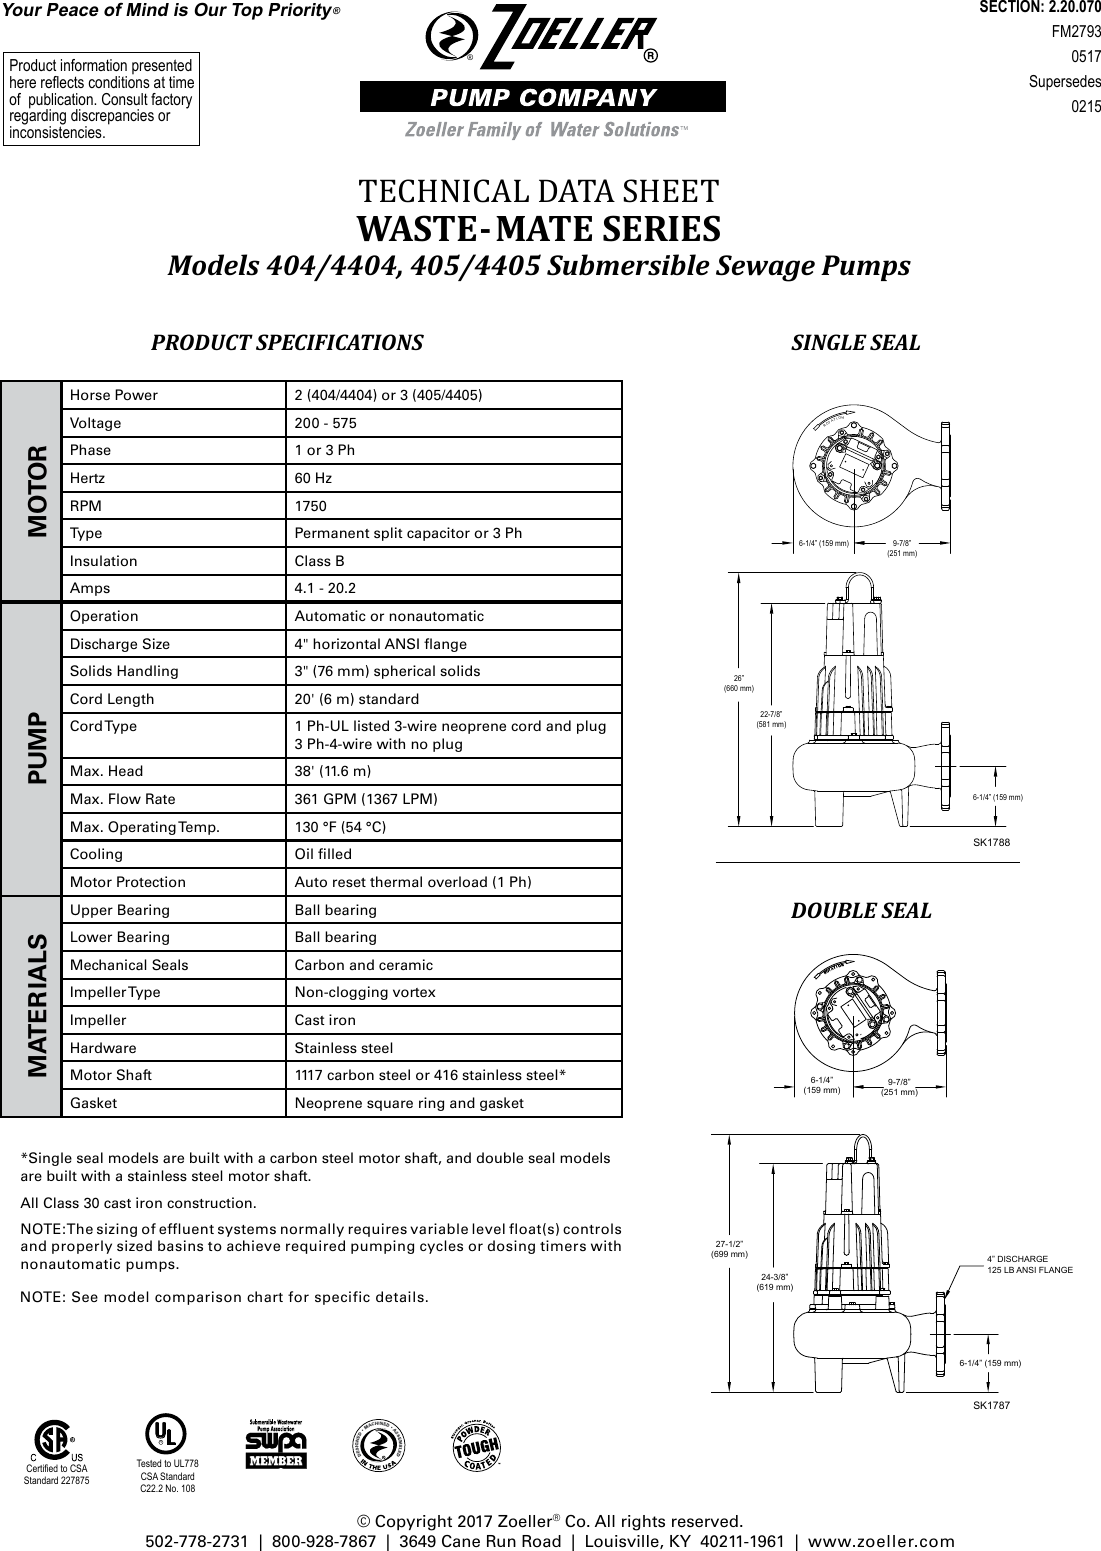 Page 1 of 2 - 551489 3 Zoeller 400 Series Waste Mate Sewage & Dewatering Technical Data